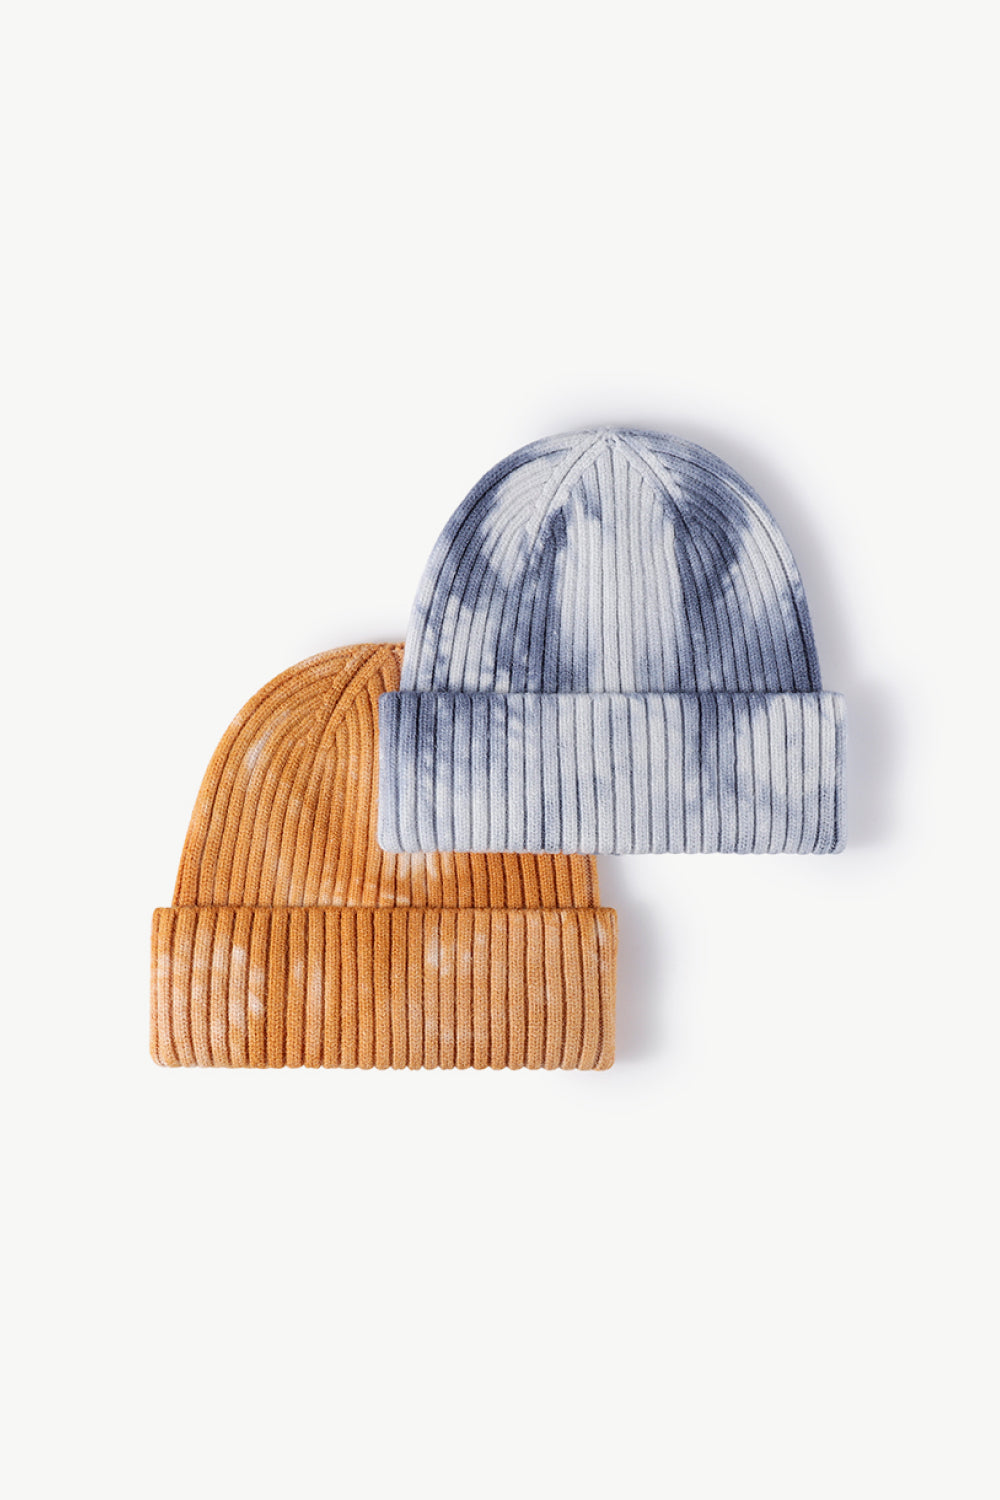 Blue and Orange Unisex Tie Dye Beanie Hat, Athletic Accessories and Fitness Accessory